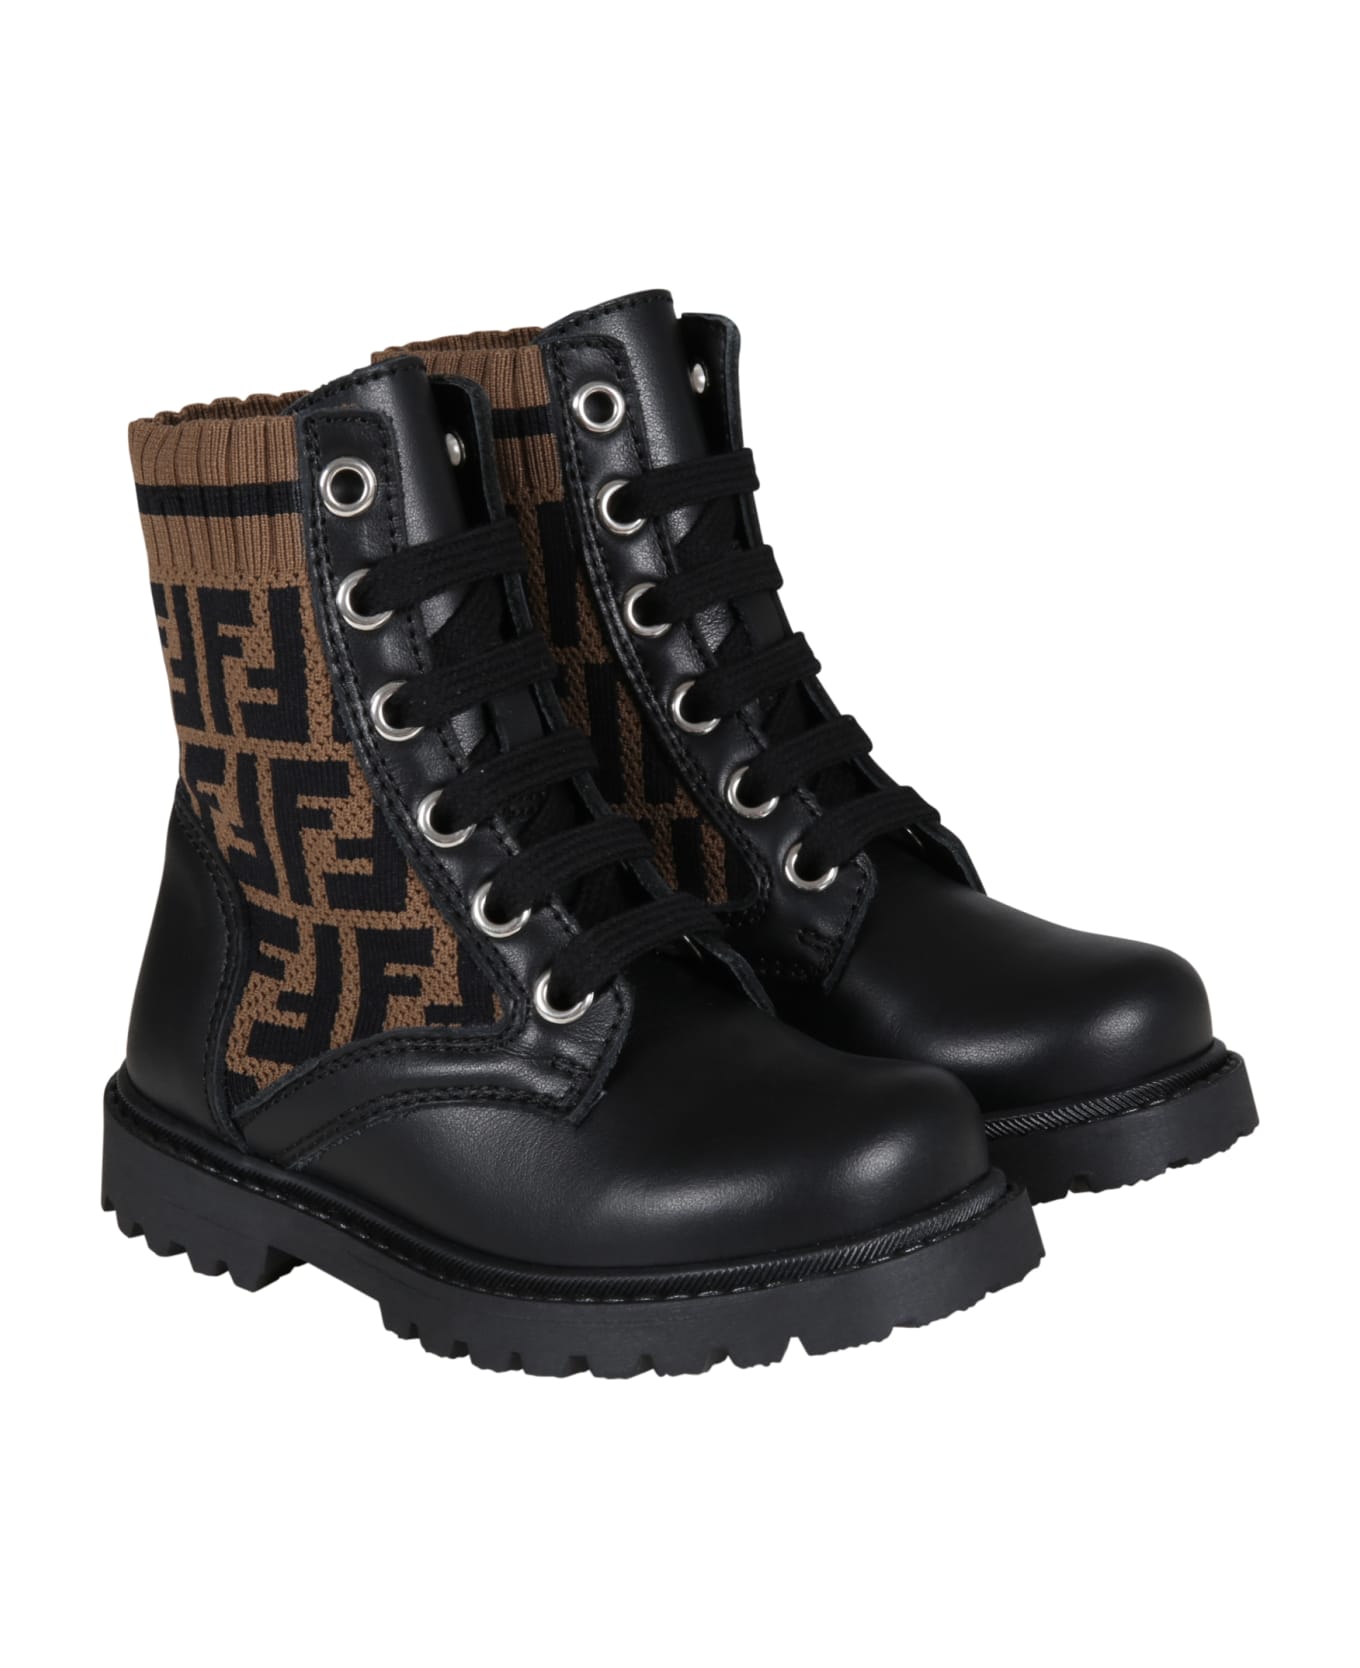 Fendi Black Boots For Kids With Double Ff - Pmm Nero Tabacco Nero